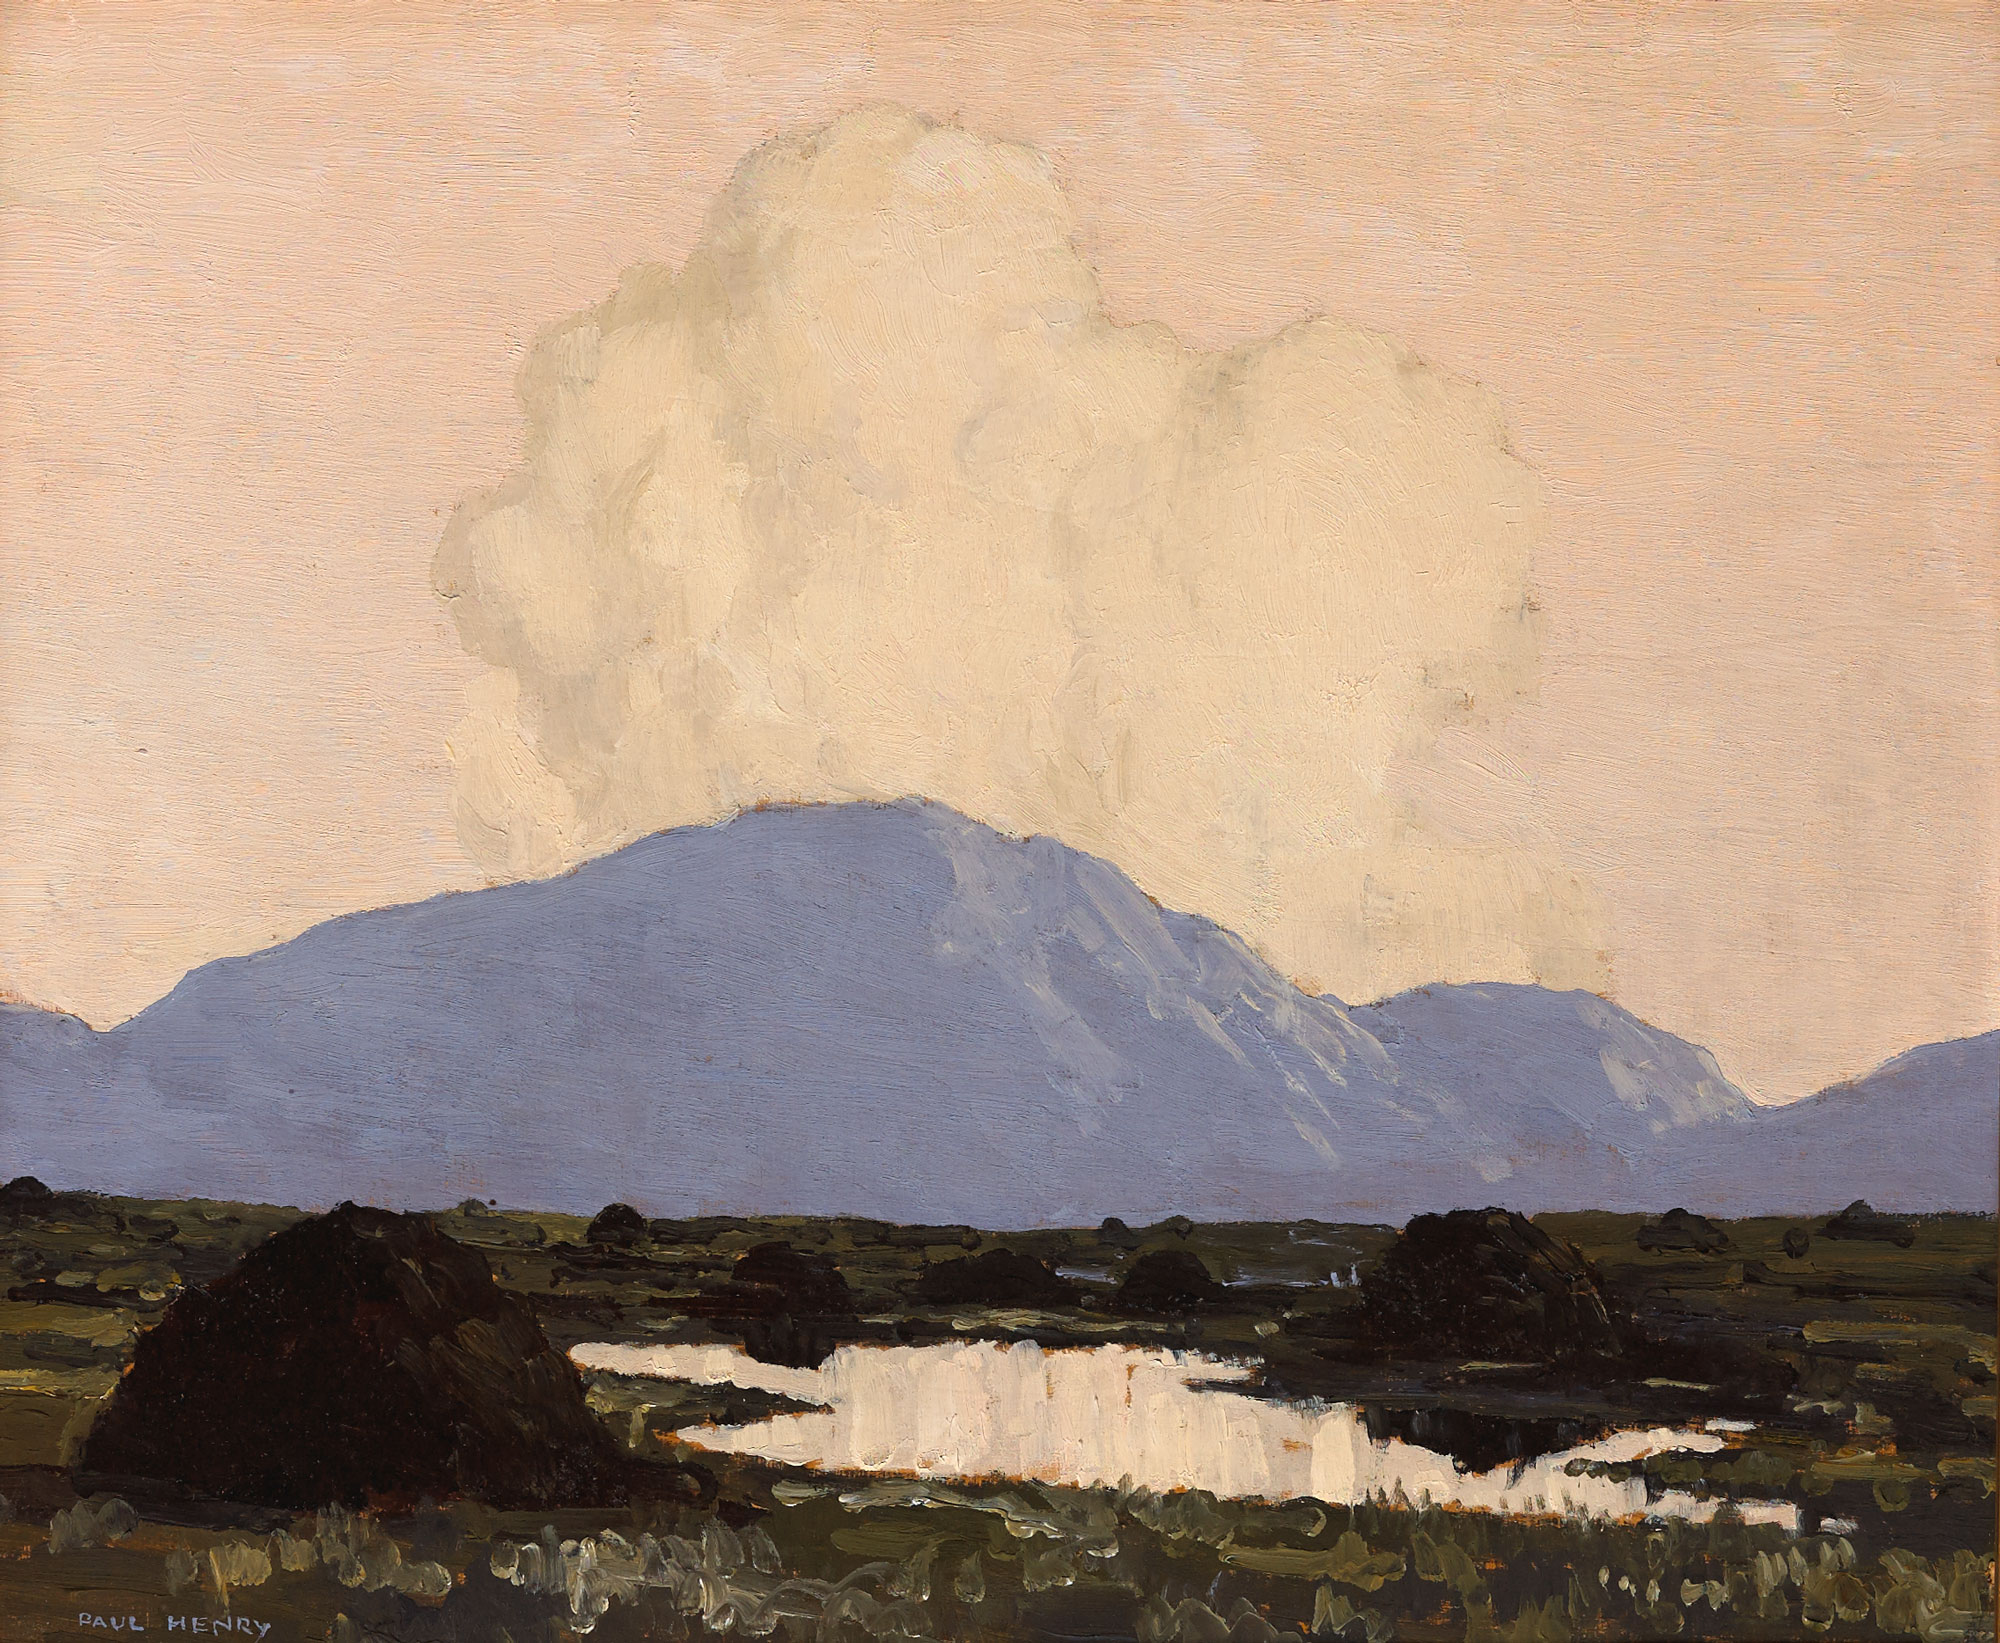 CONNEMARA, c.1929-1930 by Paul Henry sold for 66,000 at Whyte's Auctions